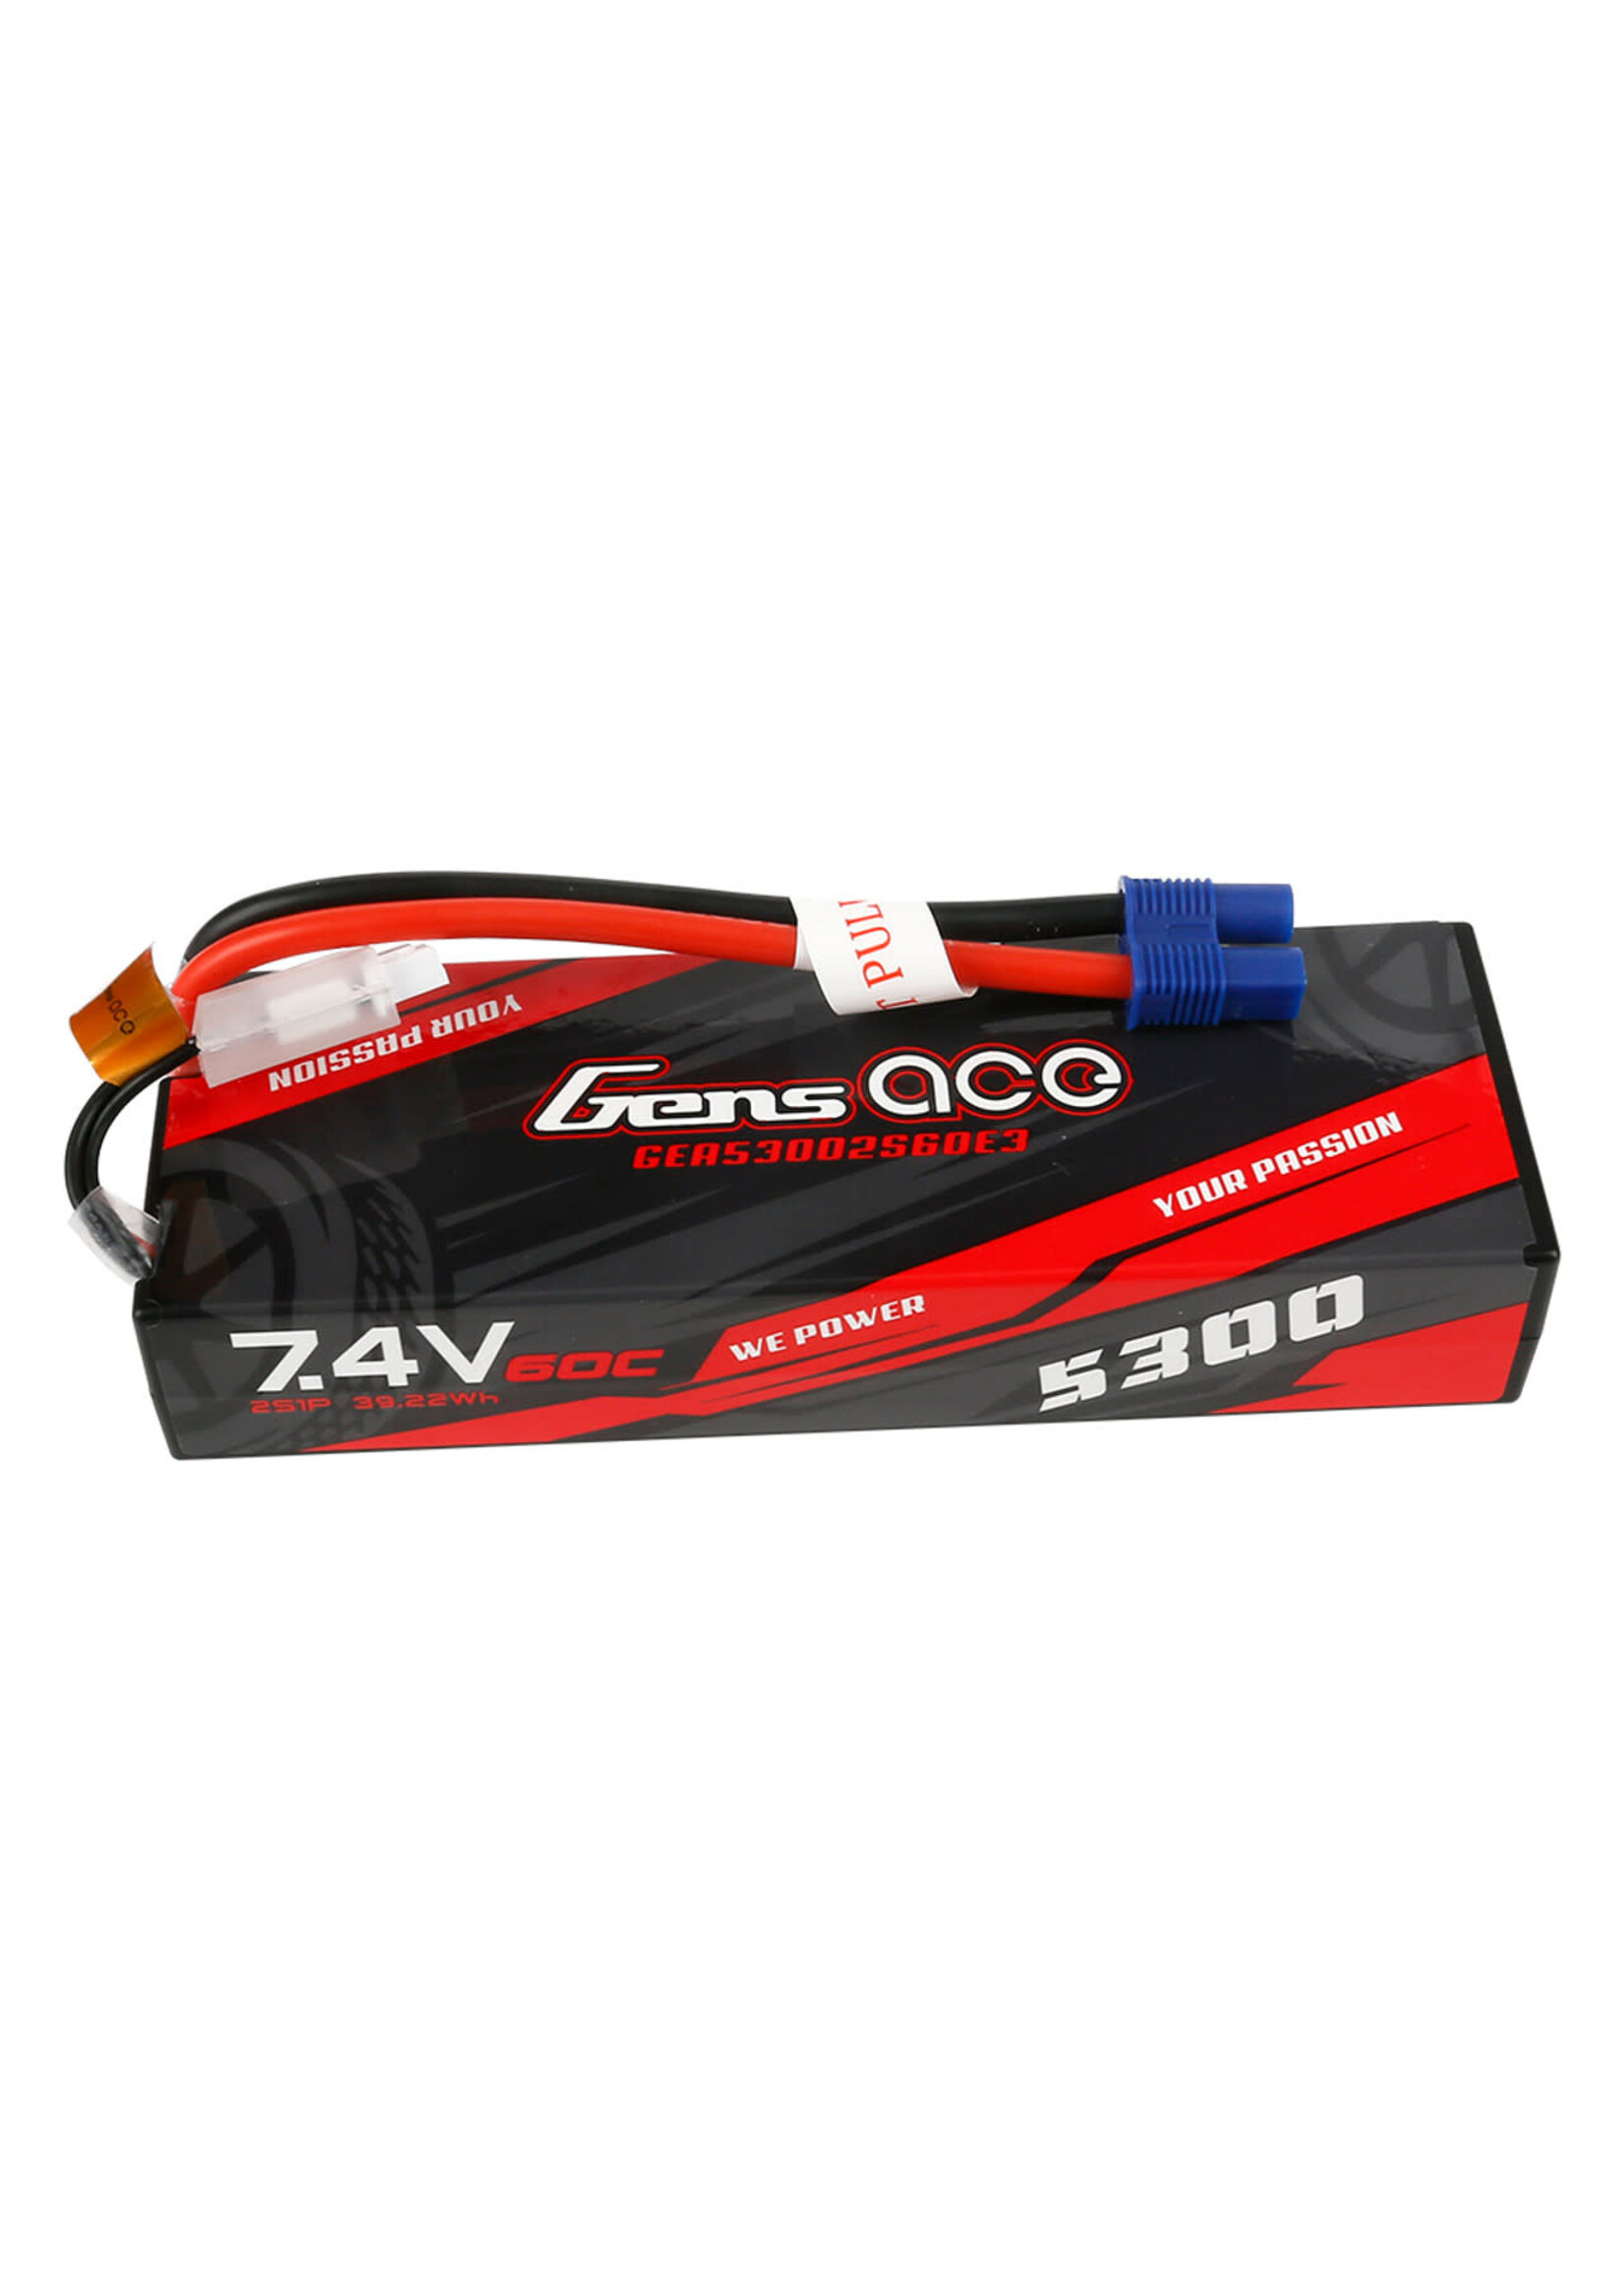 Gens ace GEA53002S60E3 Gens Ace 5300mAh 7.4V 60C 2S1P HardCase Lipo Battery Pack 24# With EC3 Plug For RC Car